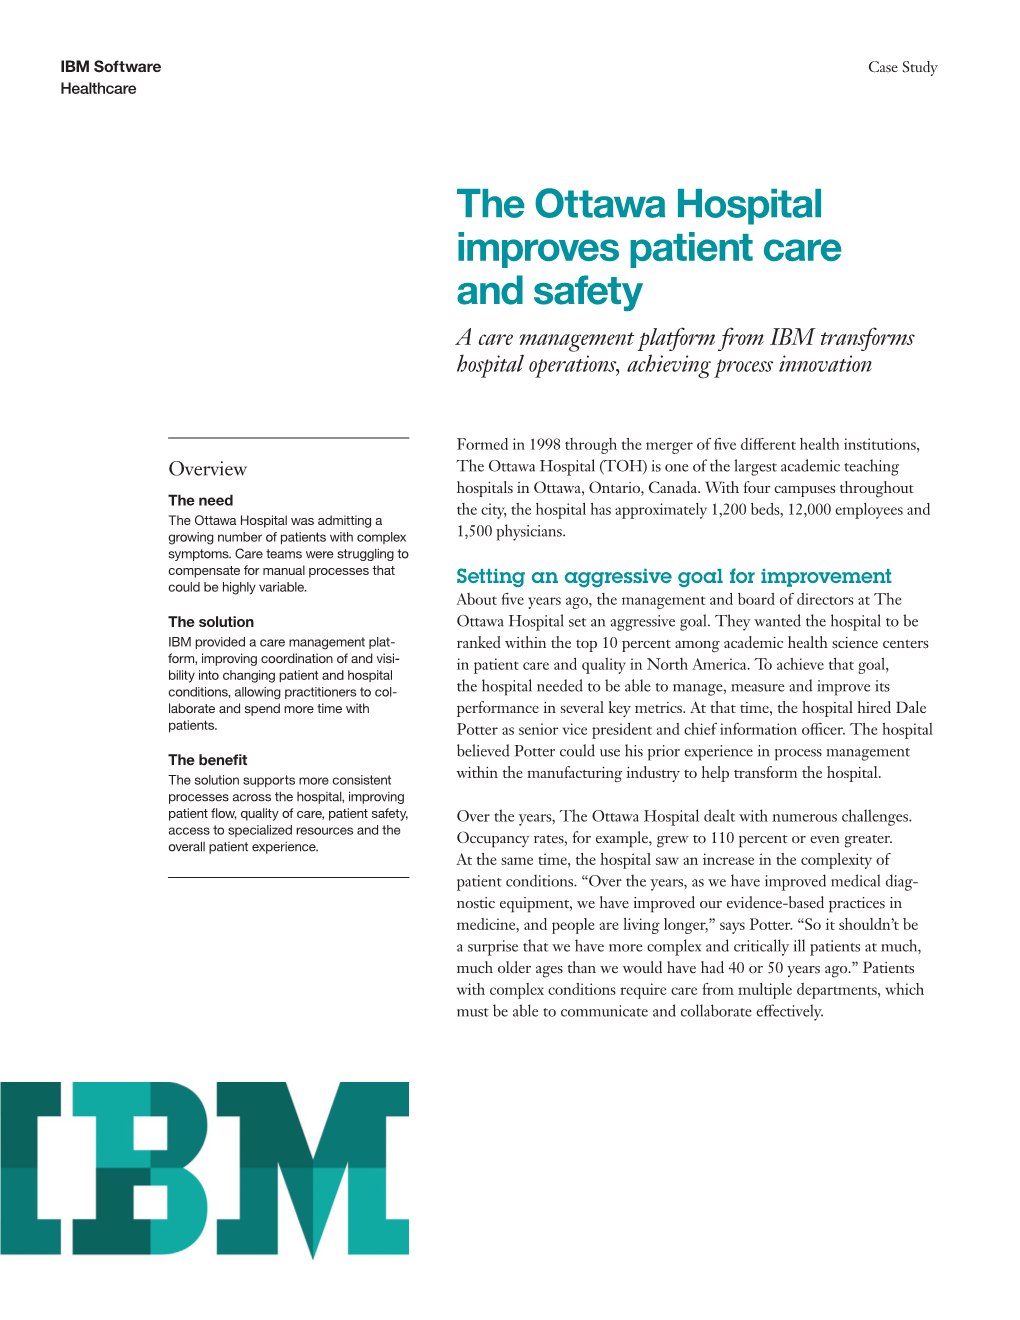 The Ottawa Hospital Improves Patient Care and Safety a Care Management Platform from IBM Transforms Hospital Operations, Achieving Process Innovation